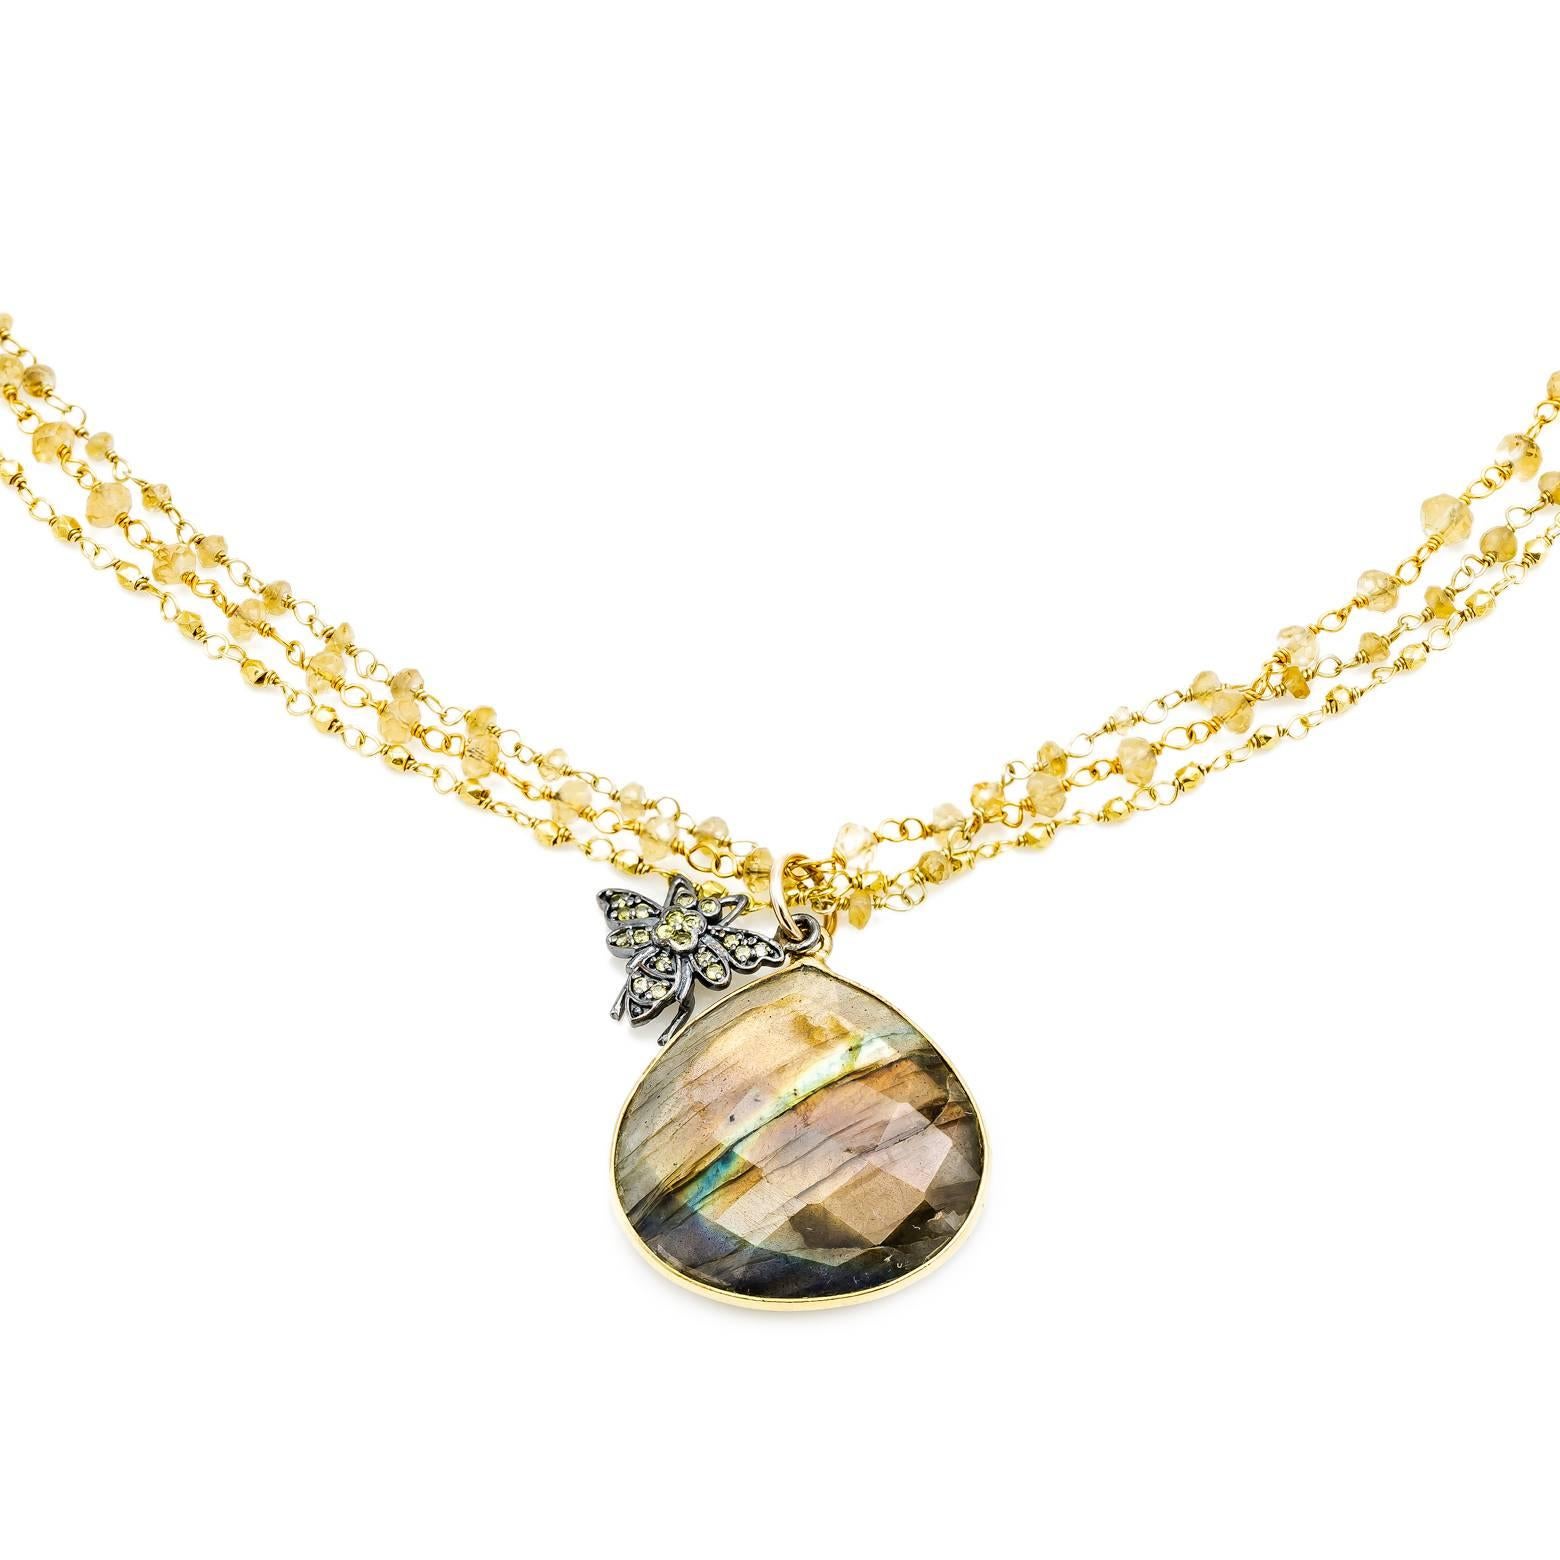 This stunning necklace is made of three gorgeous strands of citrine beaded gold chains, one large faceted labradorite pendant, and an oxidized sterling silver bumble bee adorned with diamonds. This piece was handmade in our San Francisco Bay Area